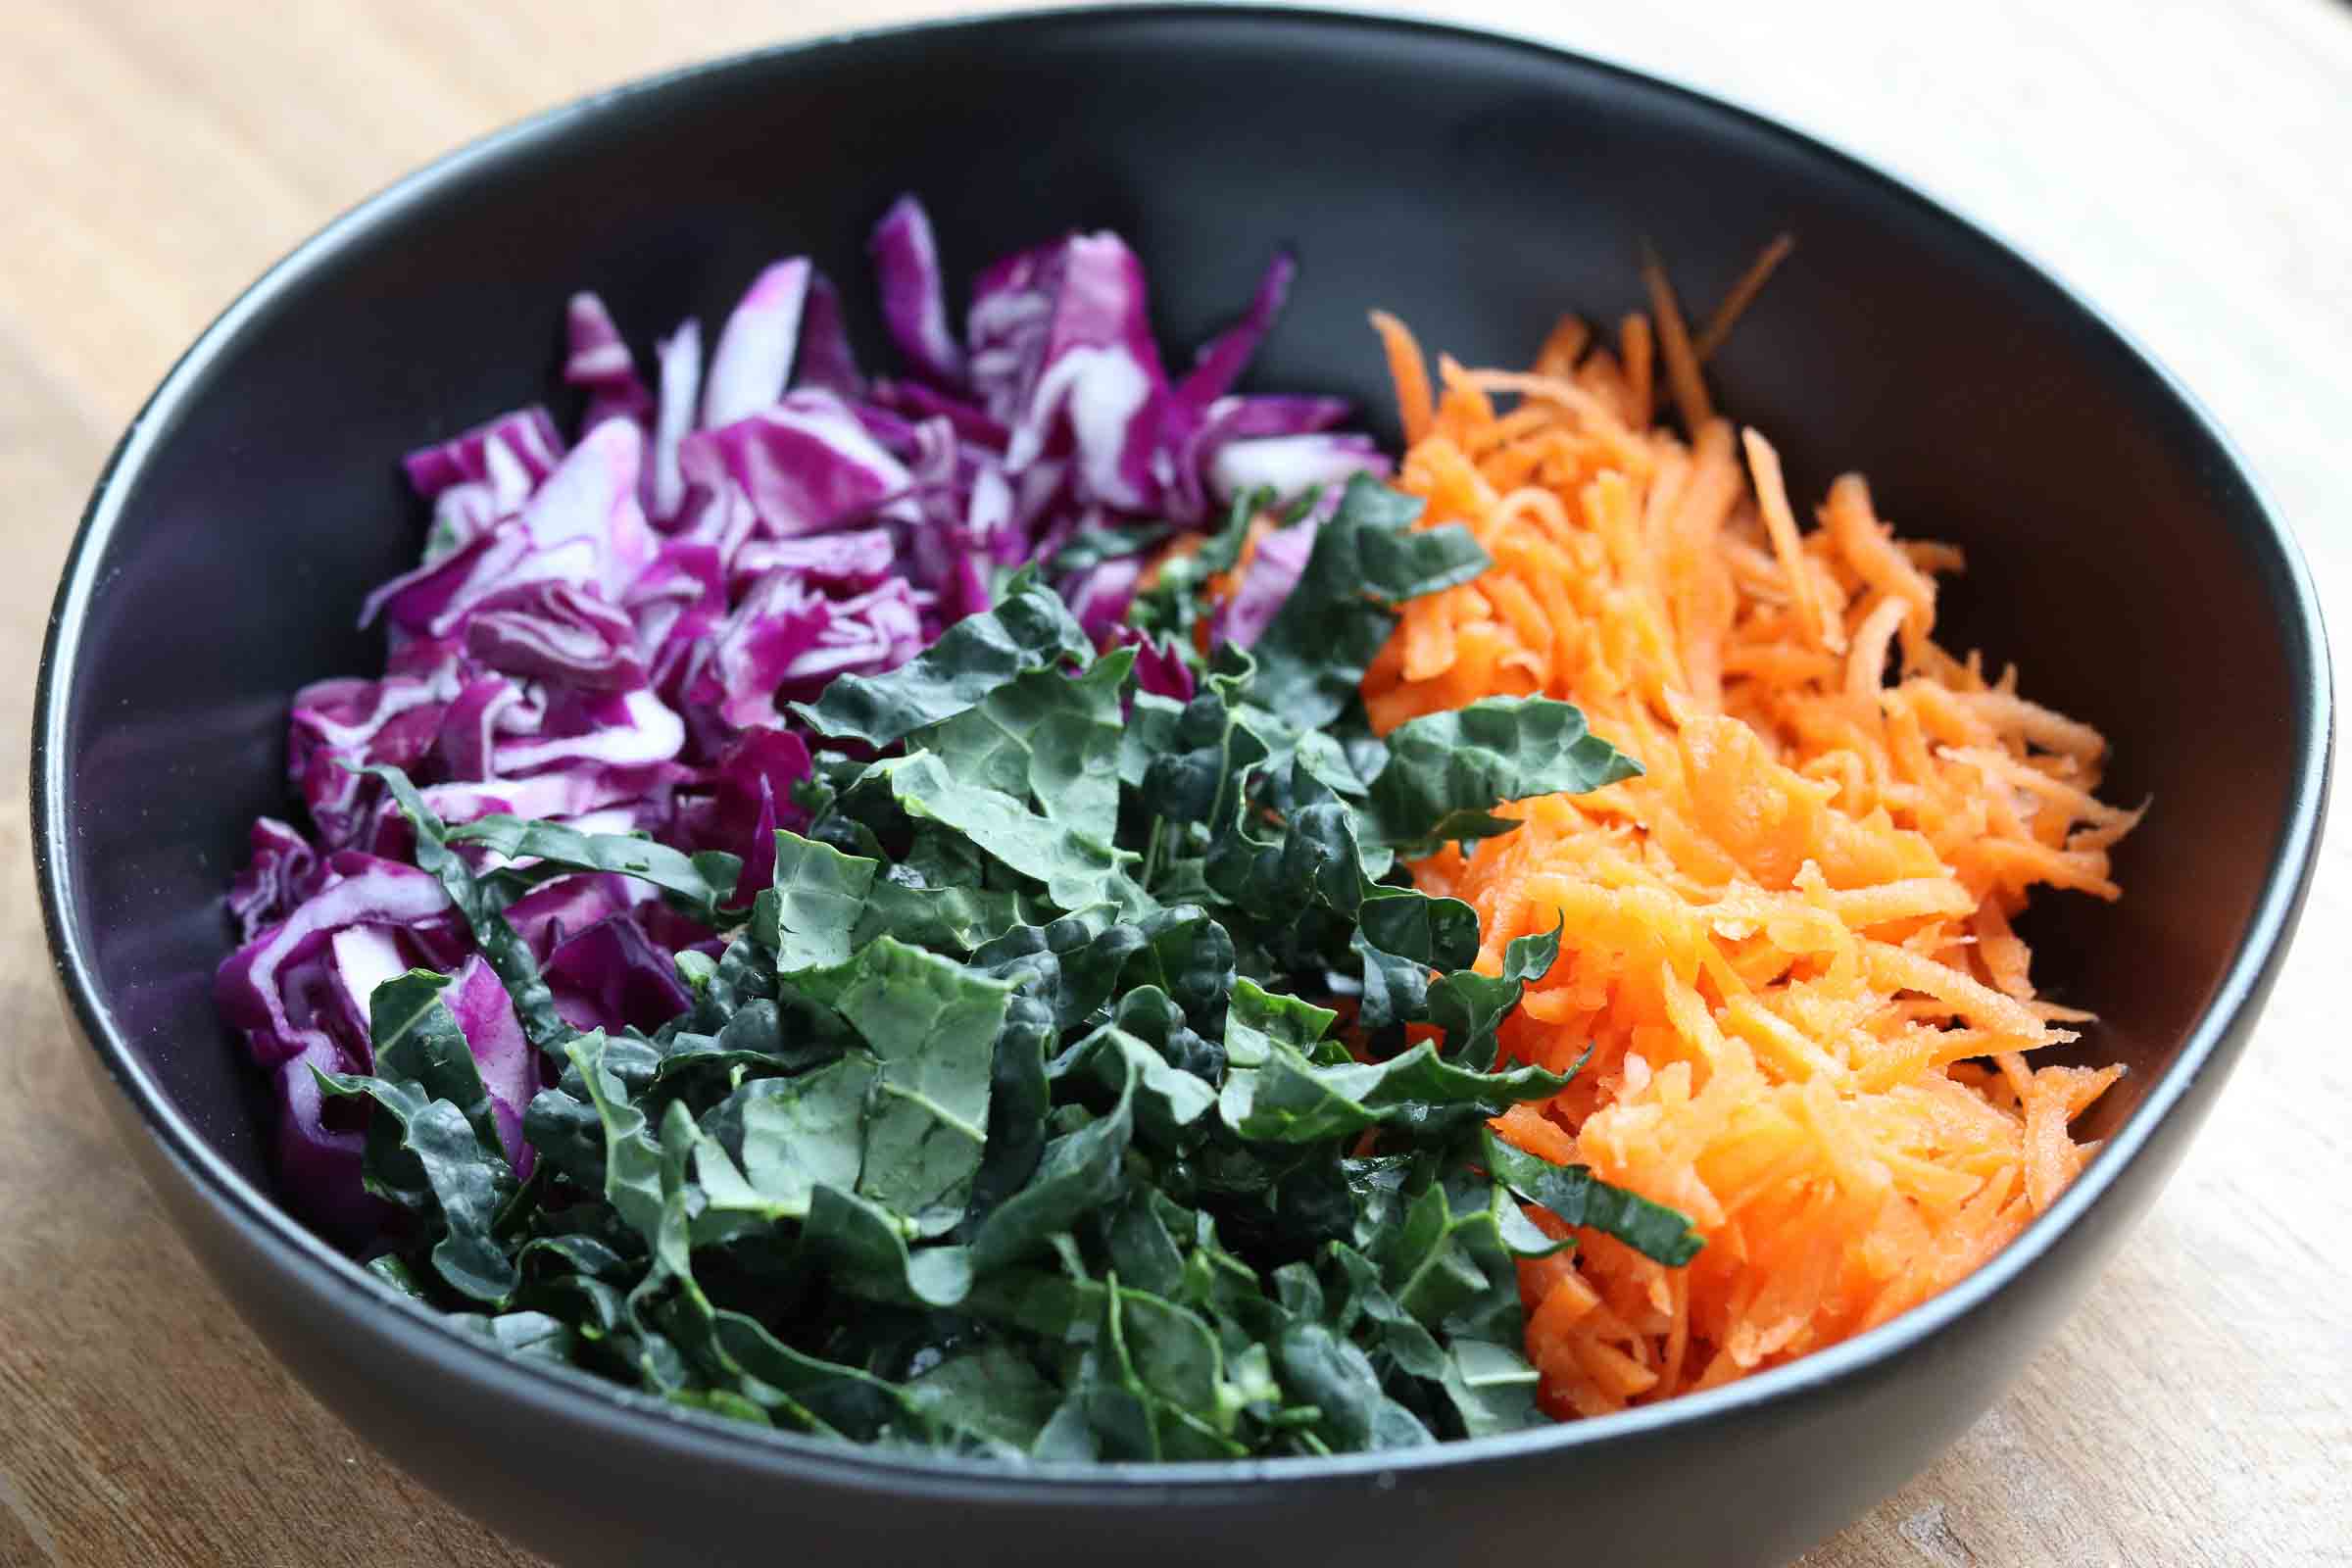 Kale, cabbage and shredded carrots in a black bowl on a wooden board from Gourmet Done Skinny